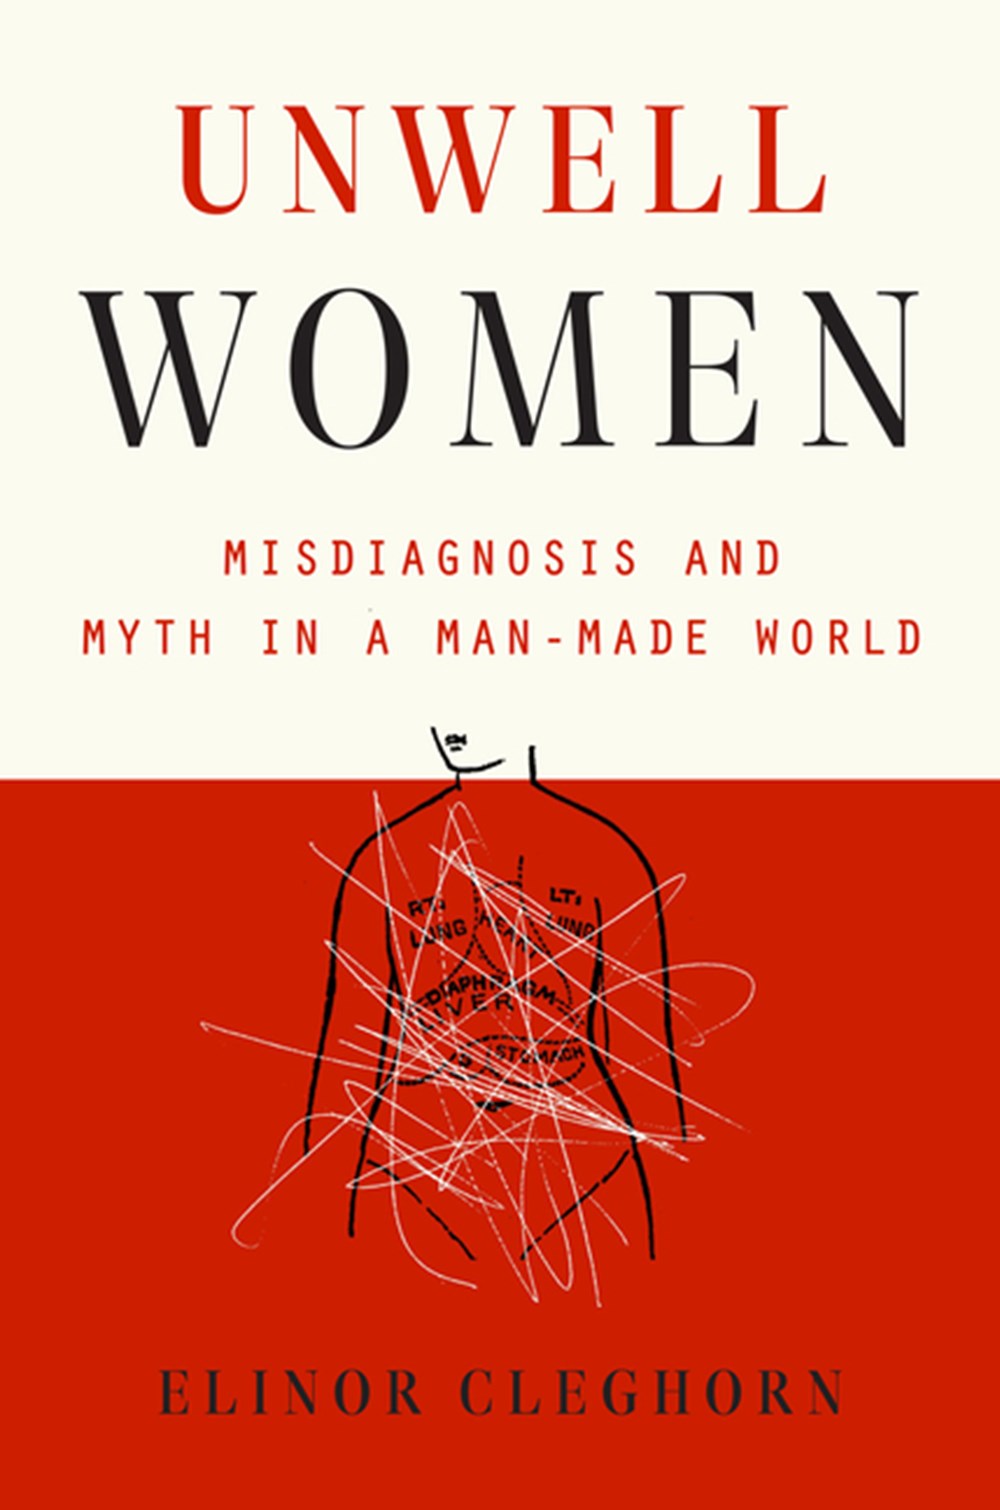 Unwell Women Misdiagnosis and Myth in a Man-Made World